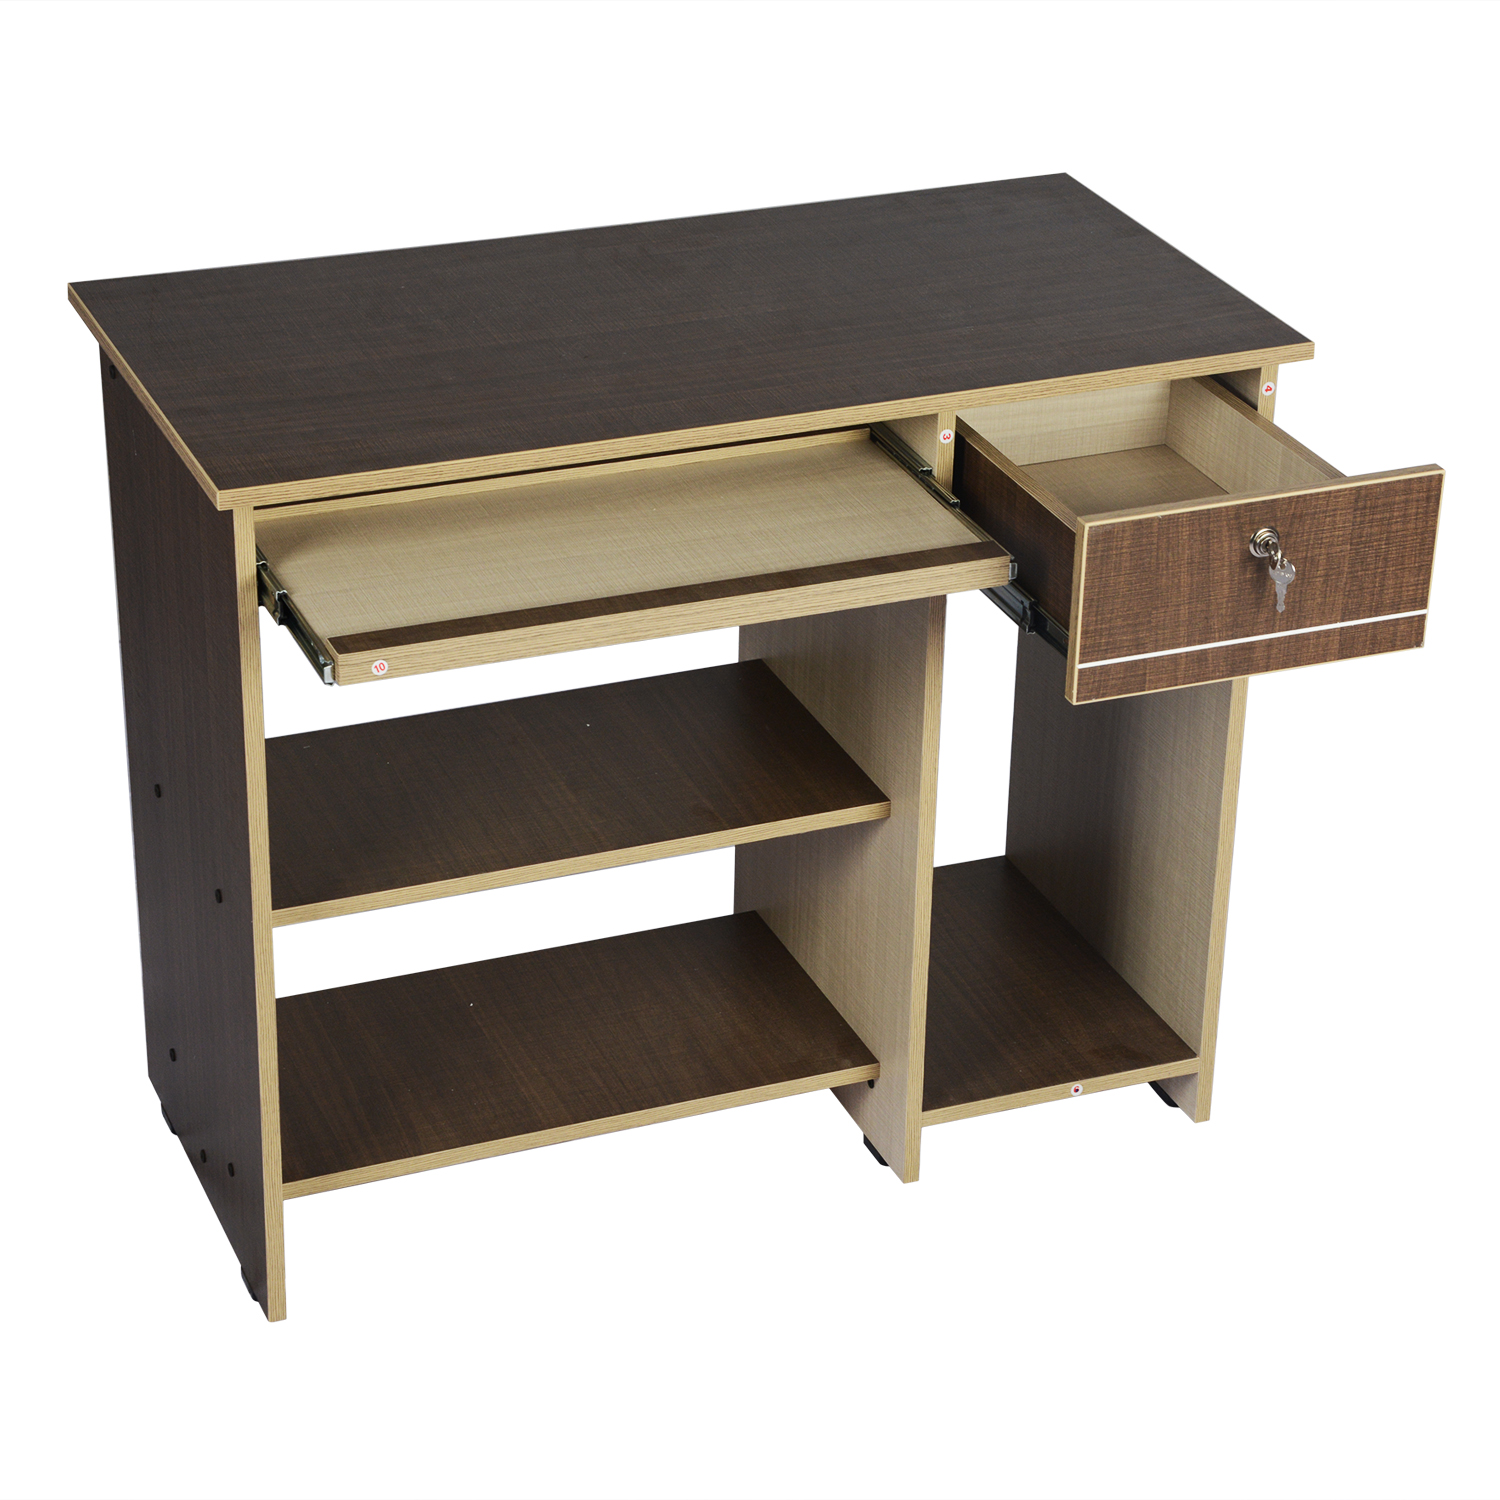 AND Bonn Work Table| | | | Office Furniture